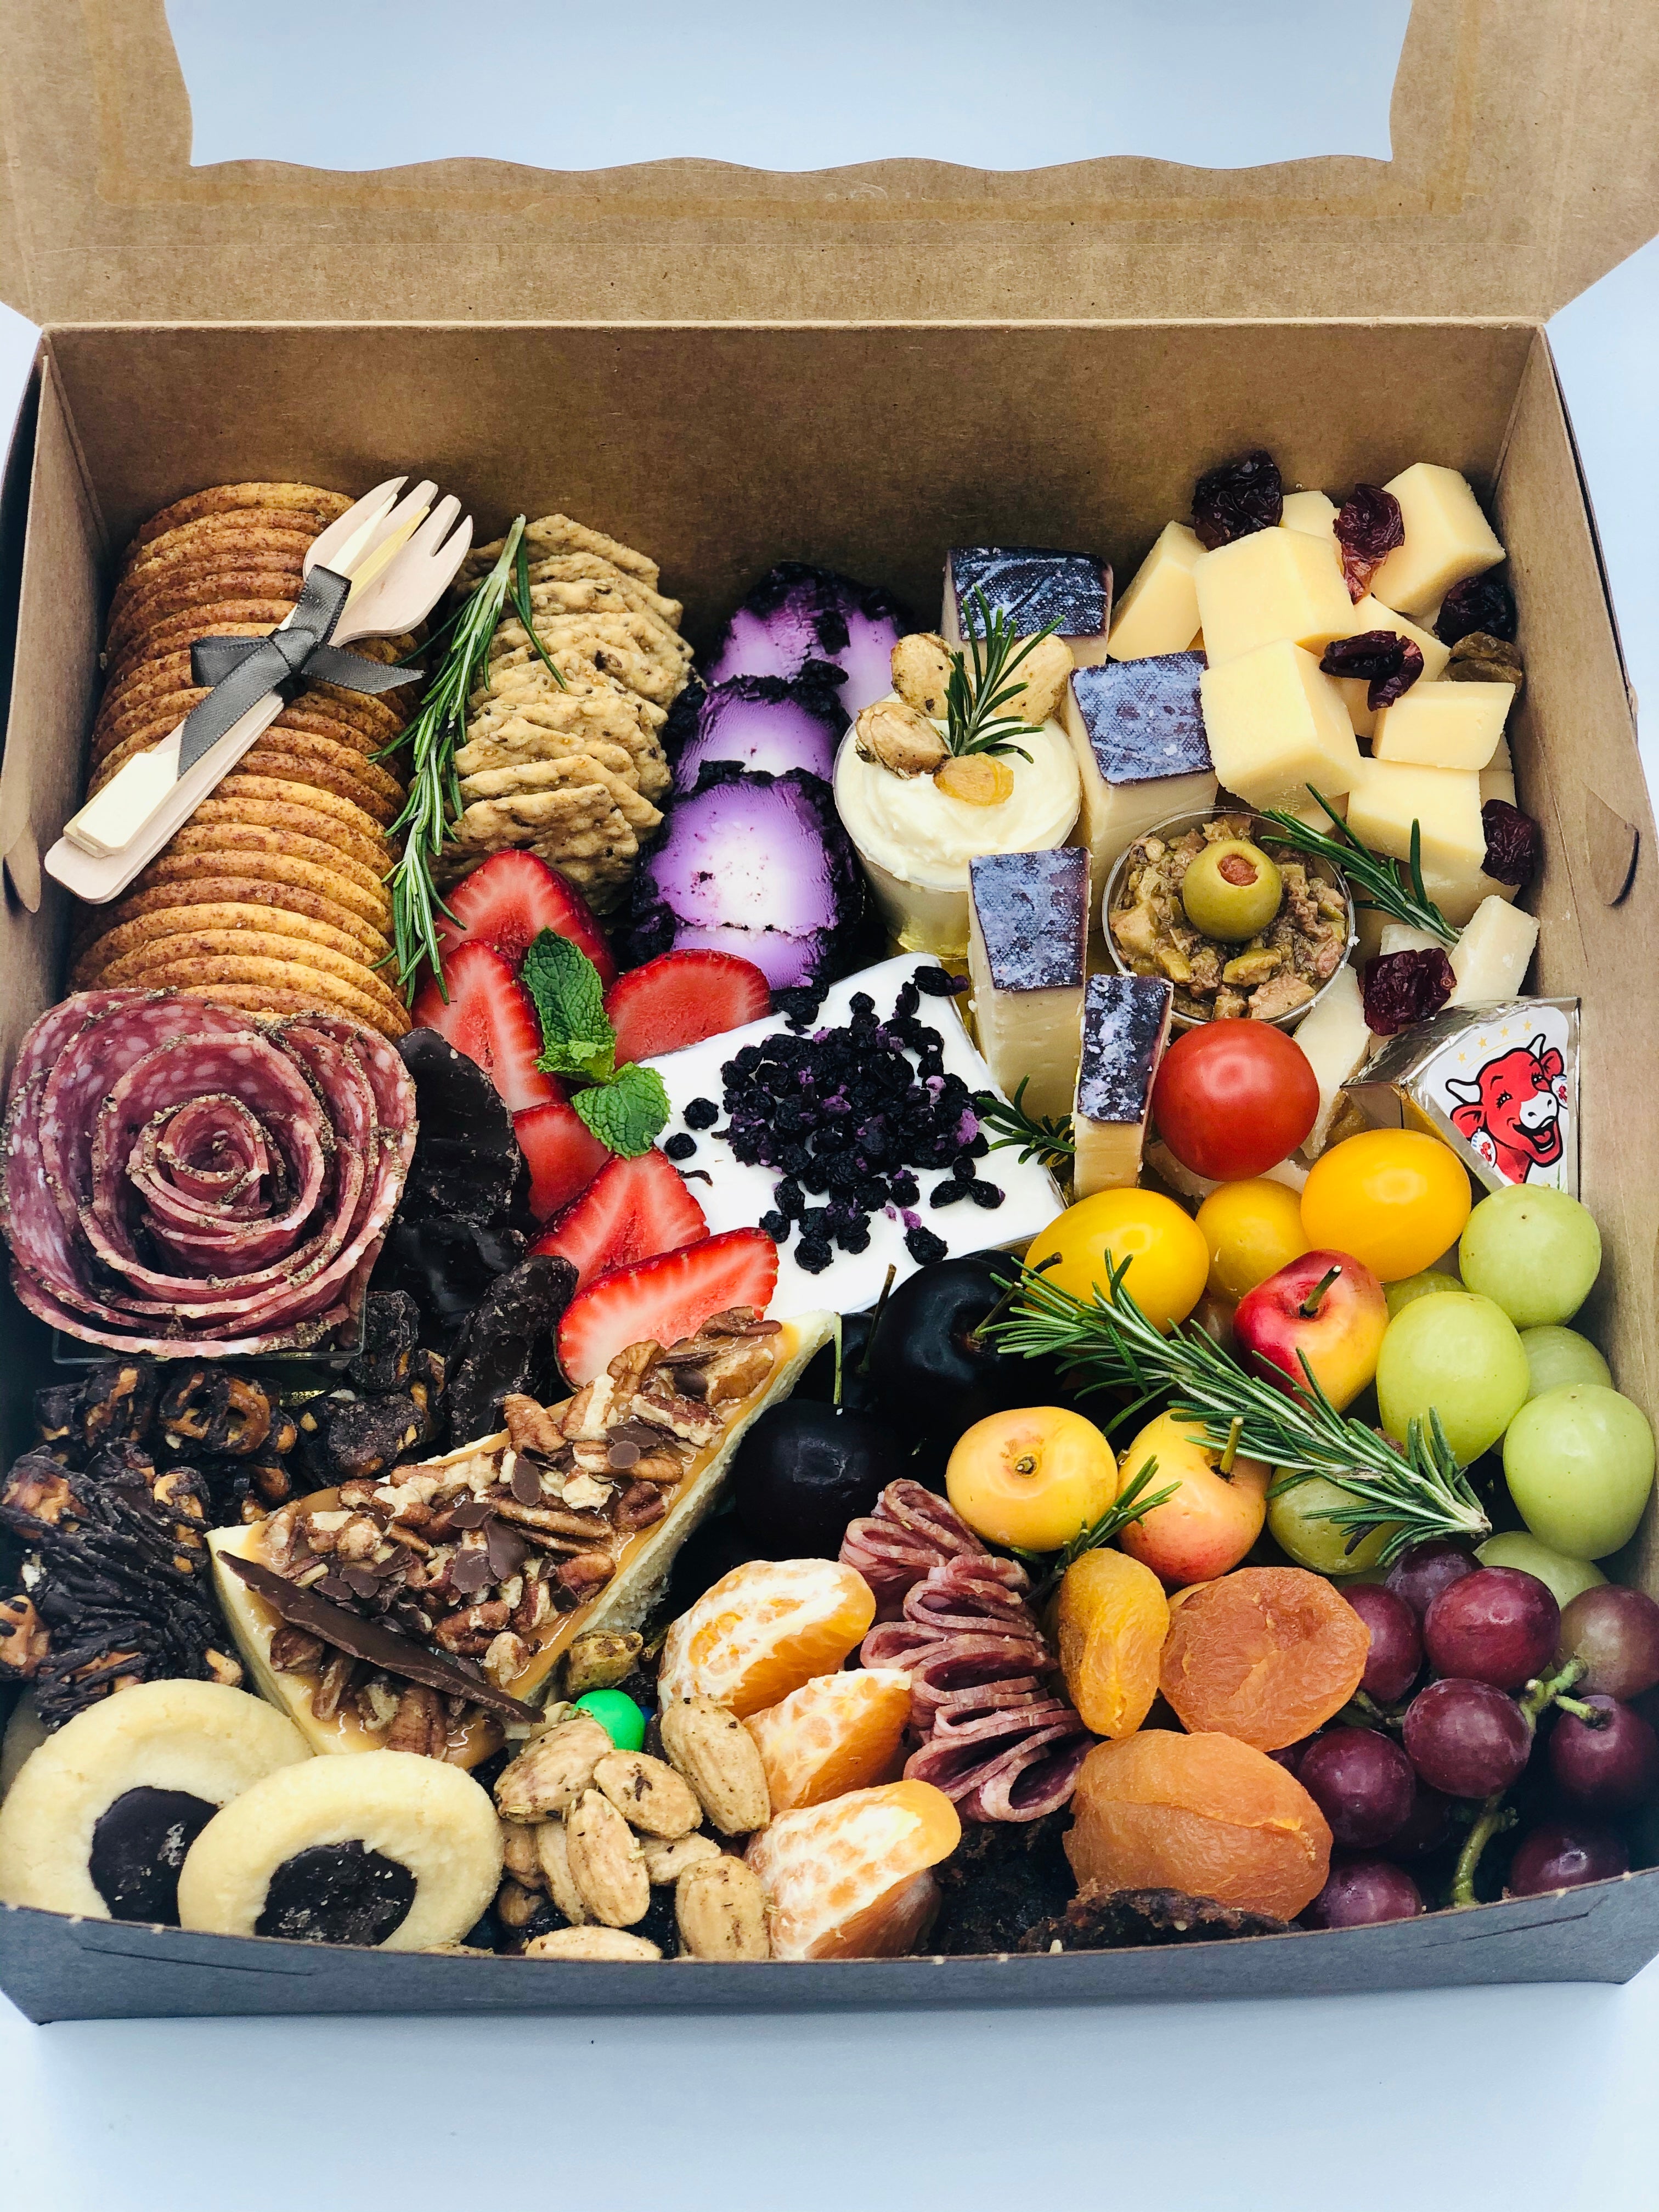 Charcuterie Boards For Any Occasion - Please note boards are only available on the weekend. Thank you so much to our amazing clients for supporting local!